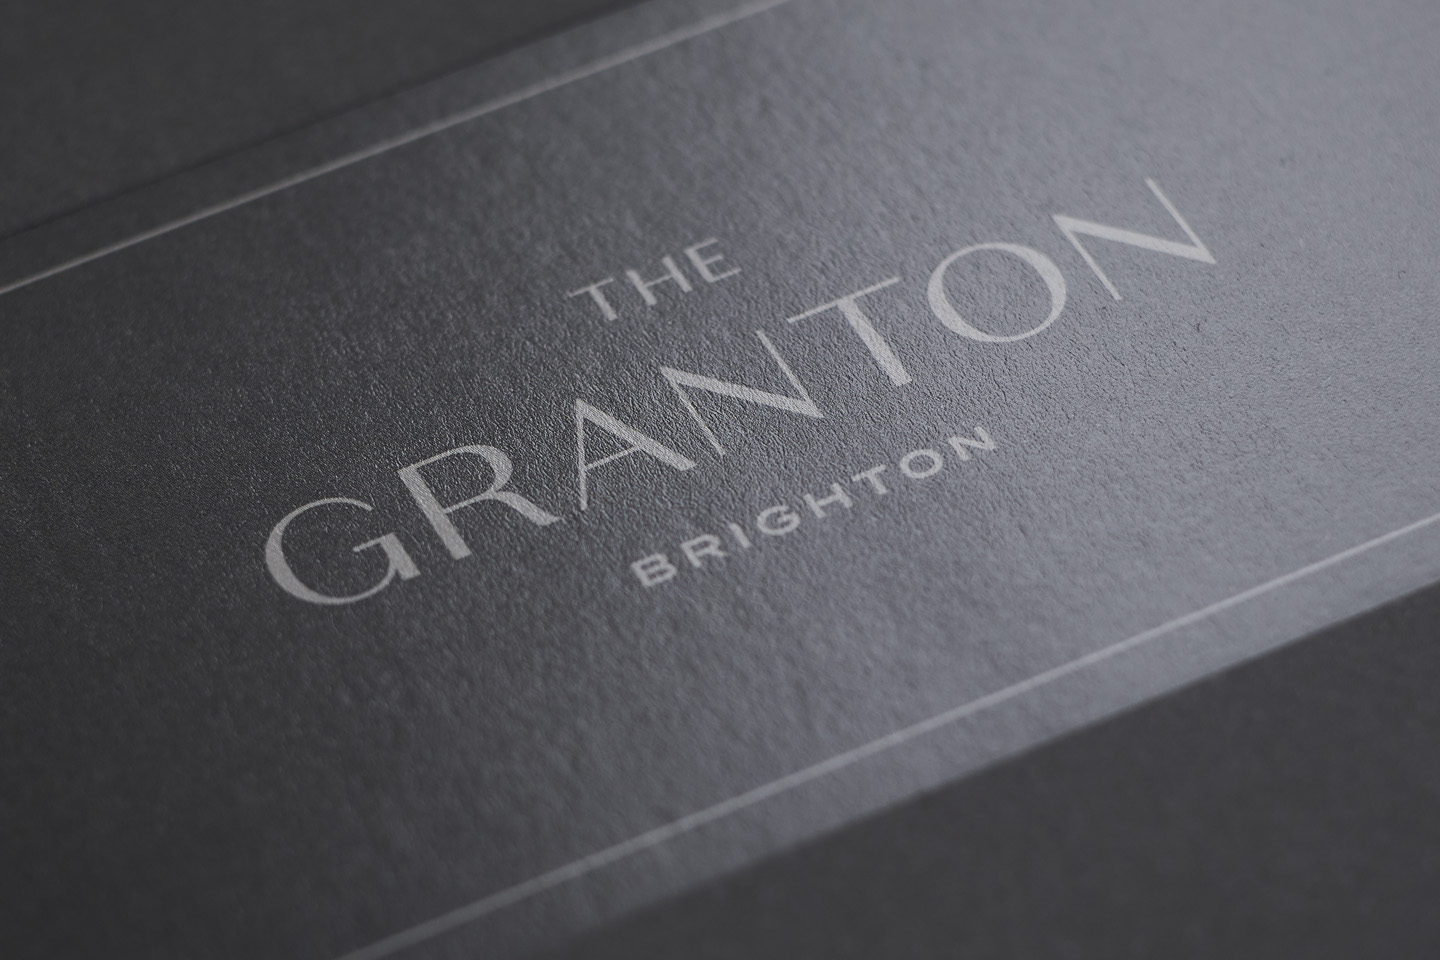 One Fell Swoop - The Granton marketing material